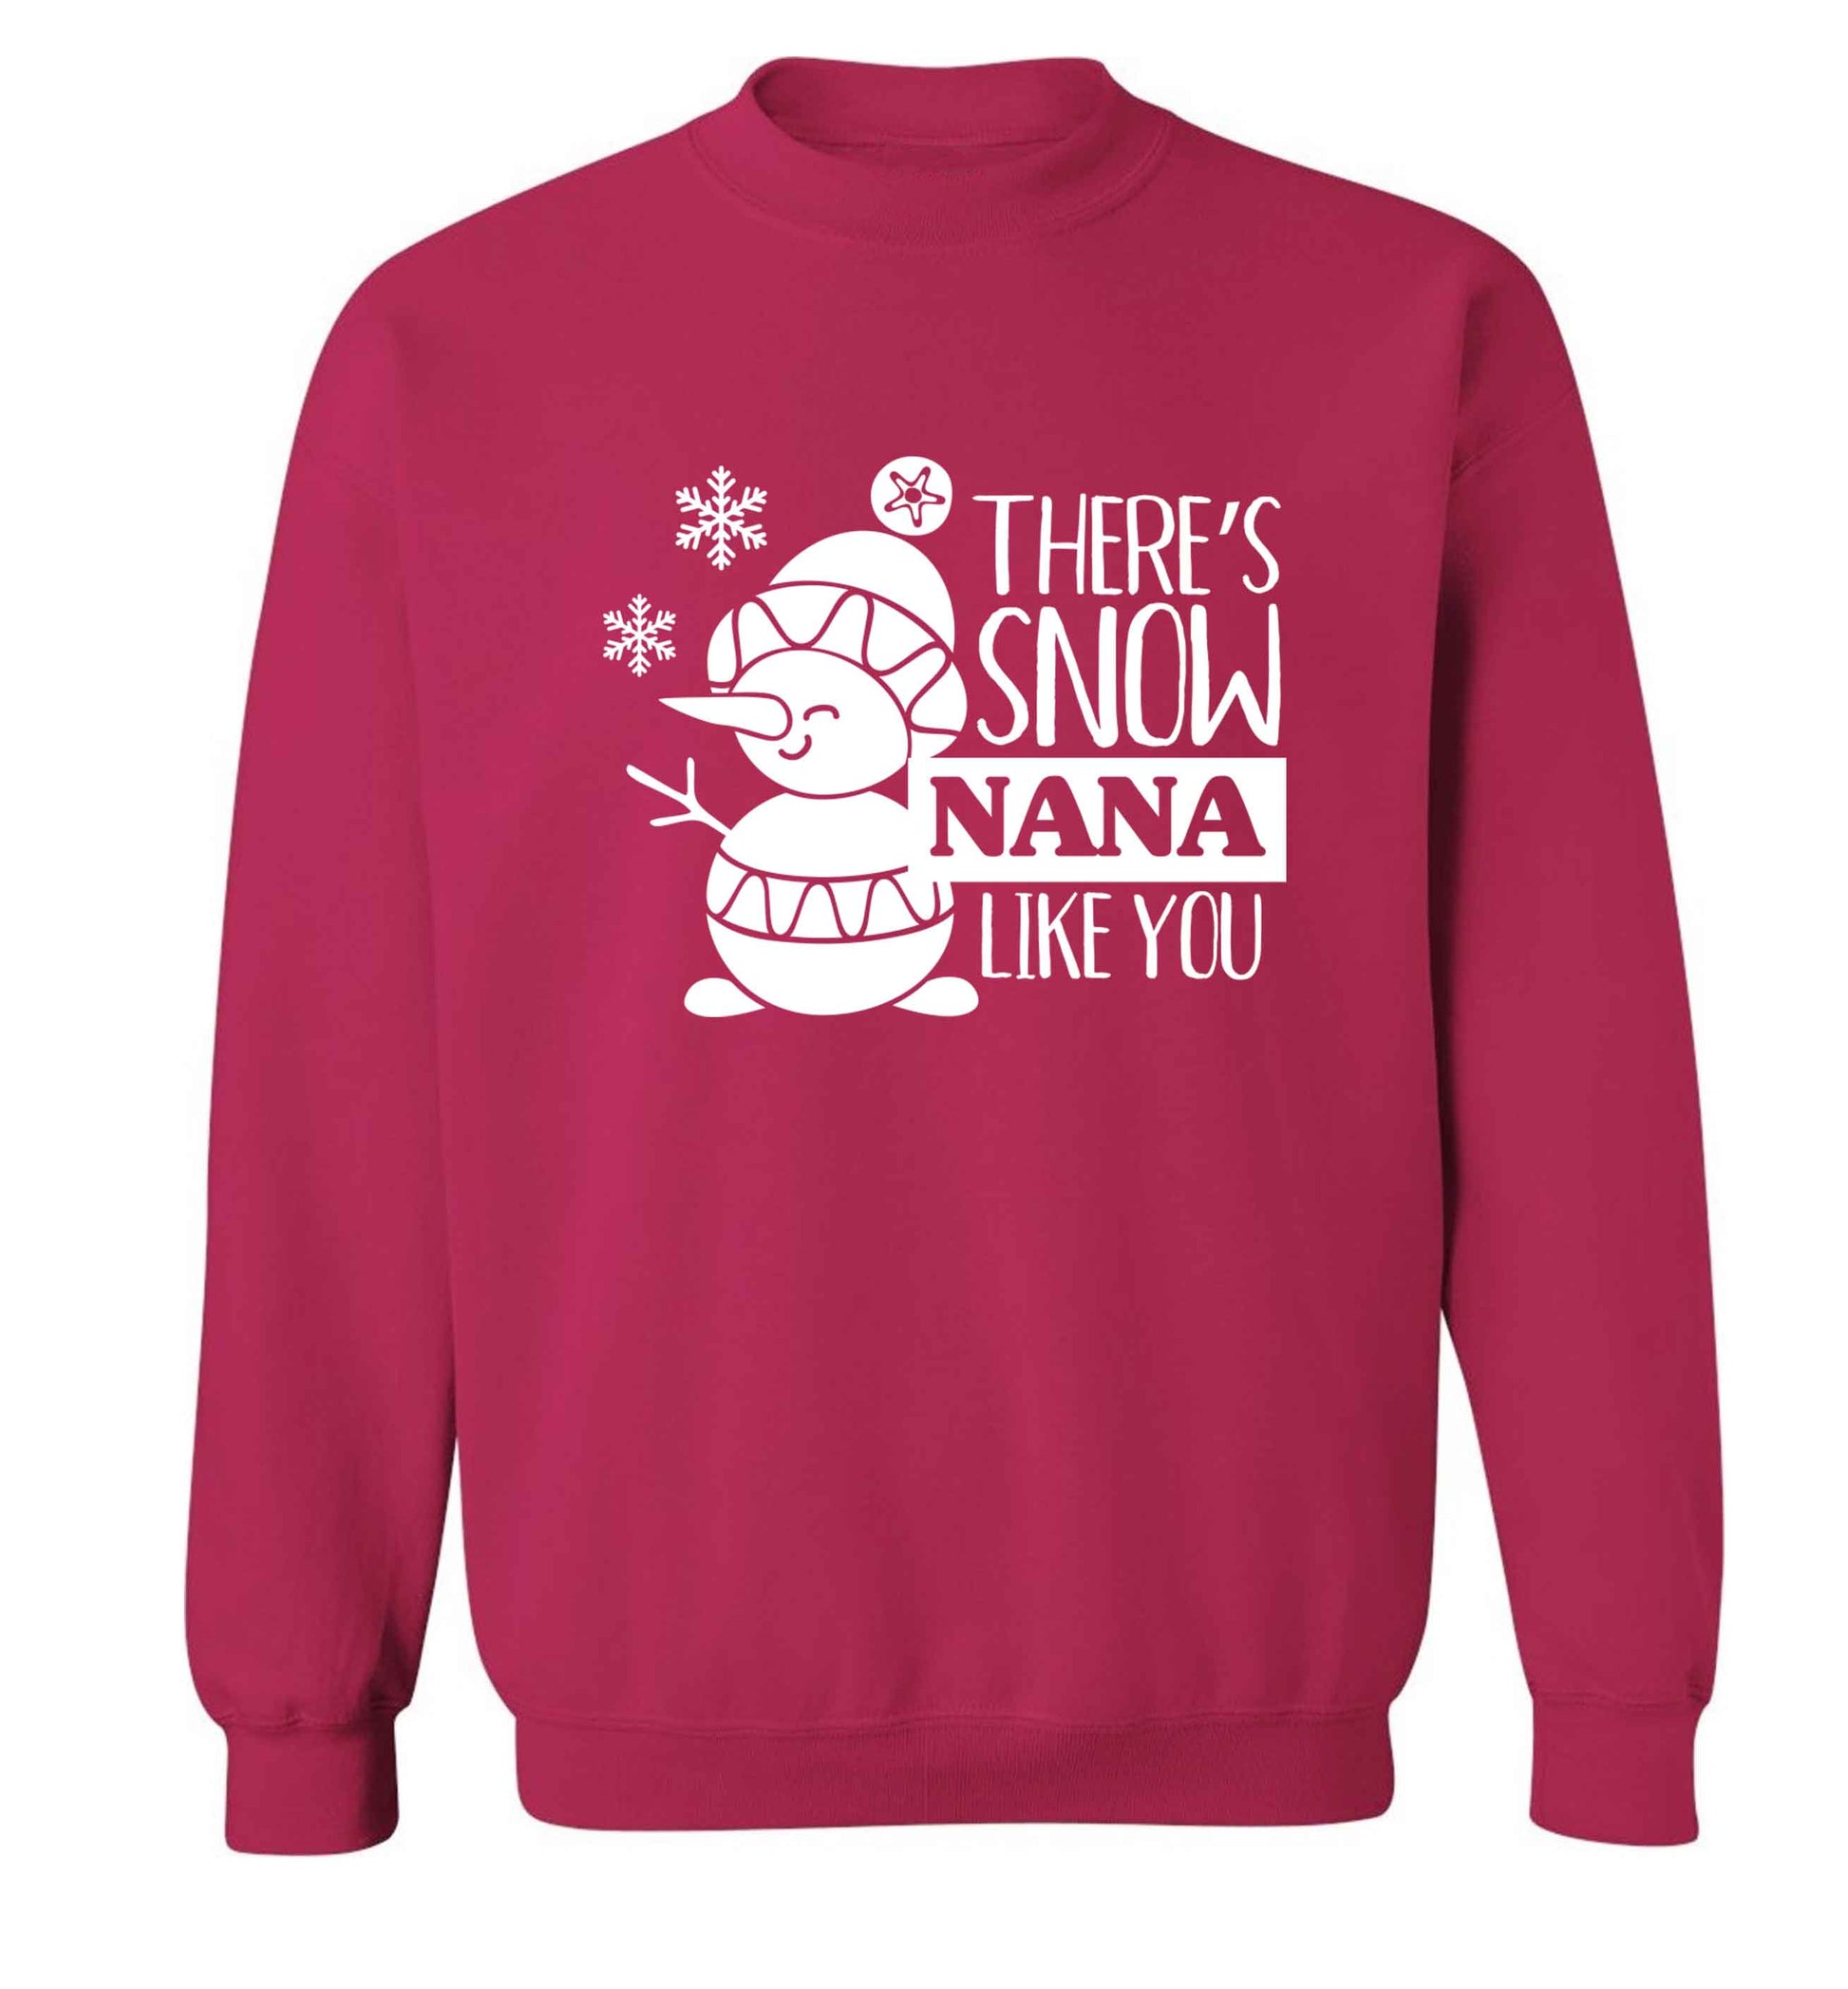 There's snow nana like you adult's unisex pink sweater 2XL